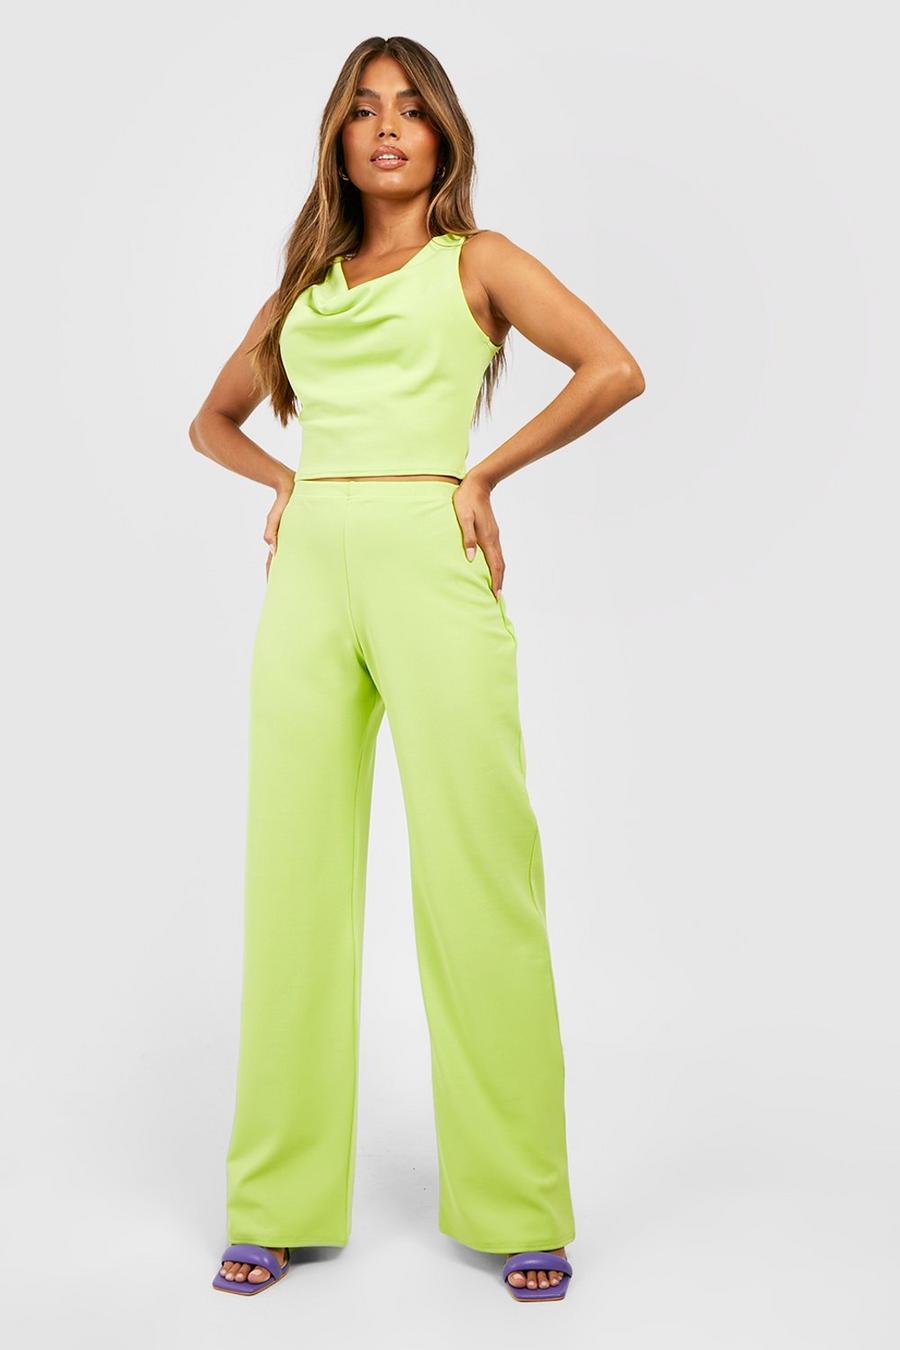 Chartreuse Cowl Neck Top & Wide Leg Pants image number 1